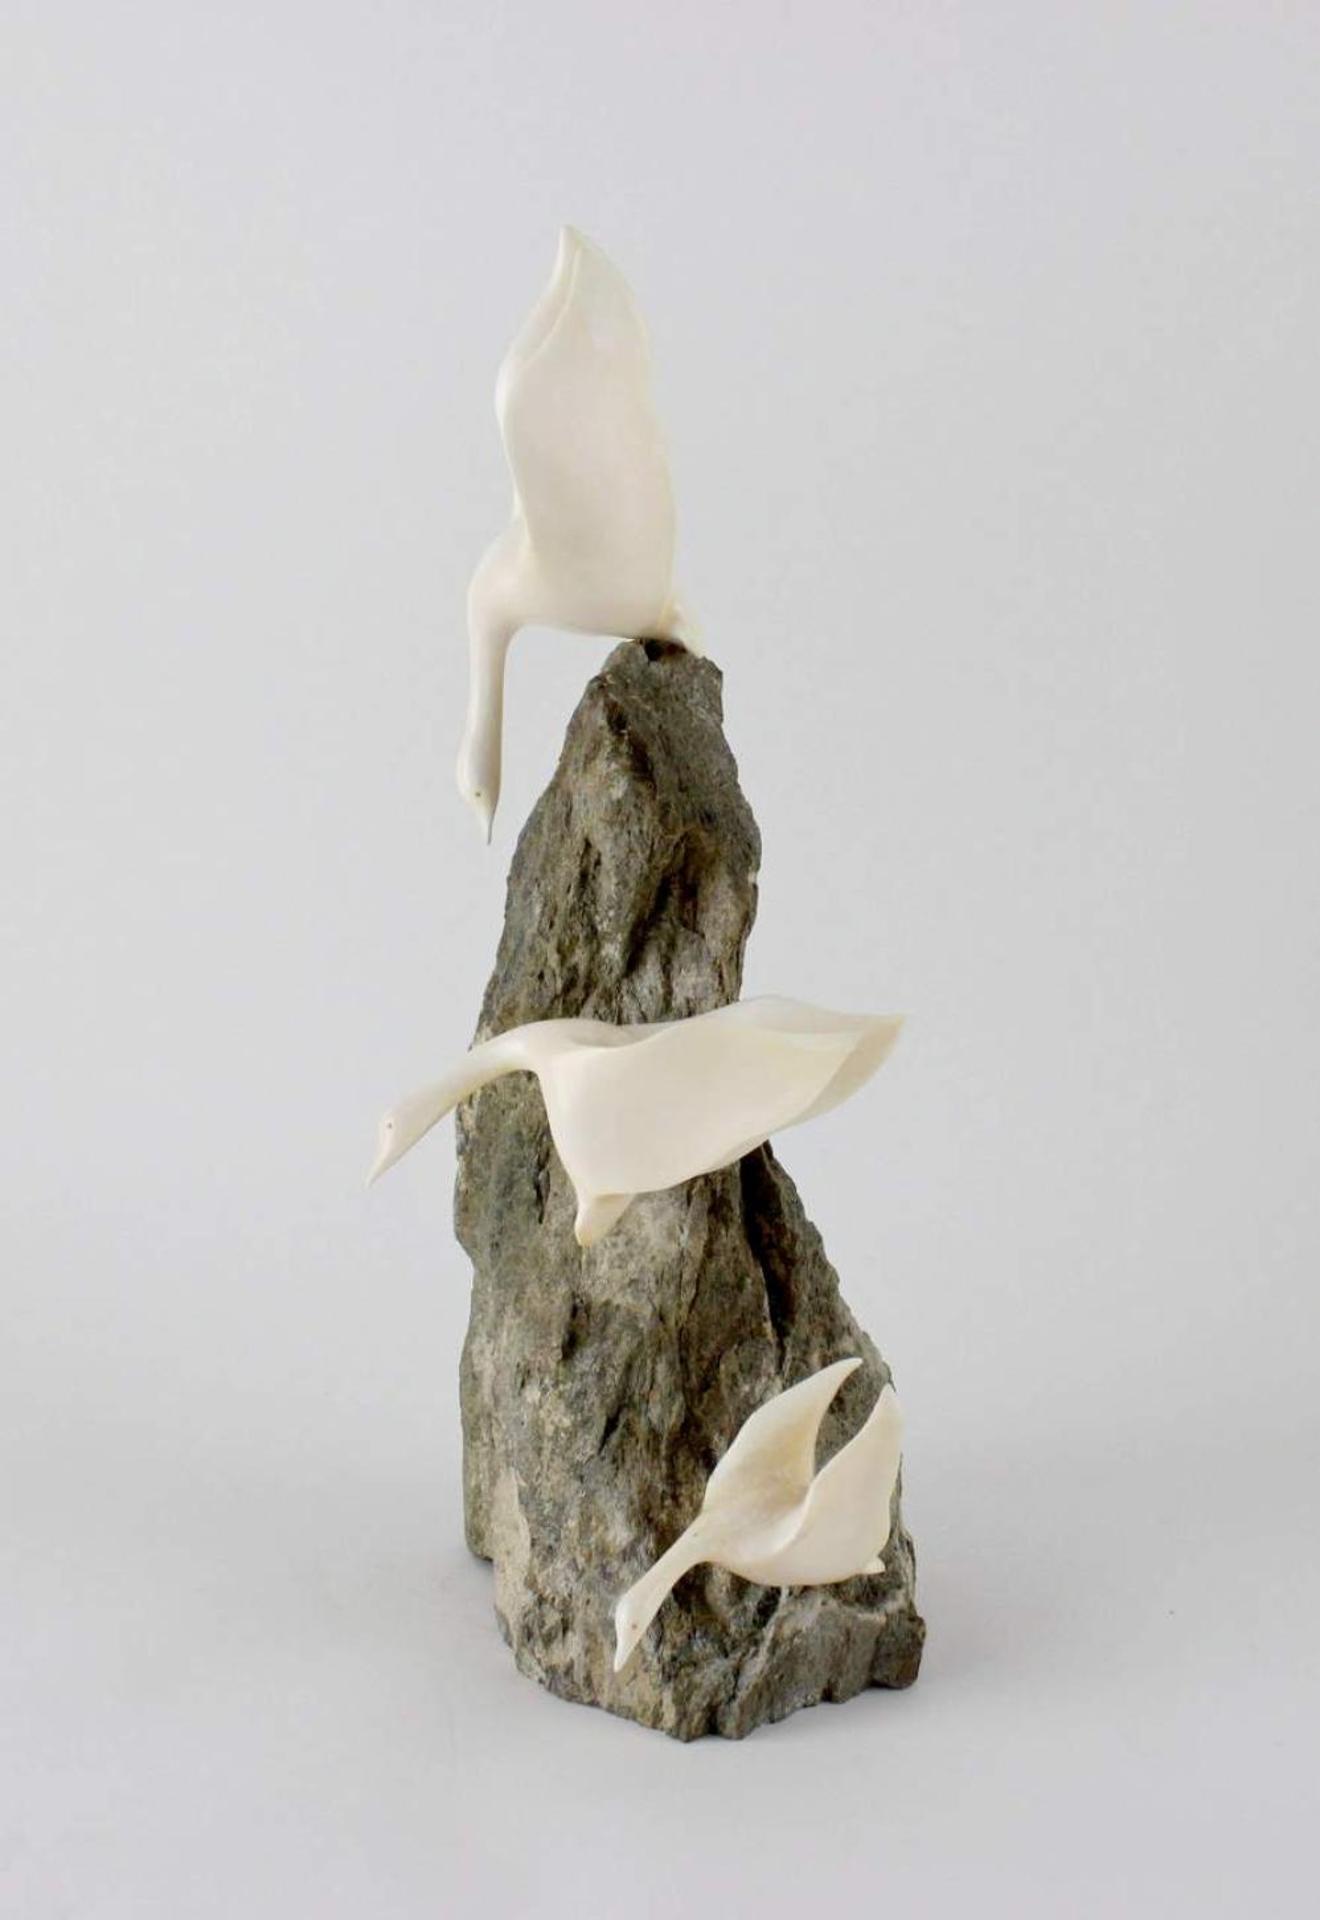 David Wong (1937-1998) - a large carved ivory and stone sculpture depicting three geese in flight atop a rock outcrop.